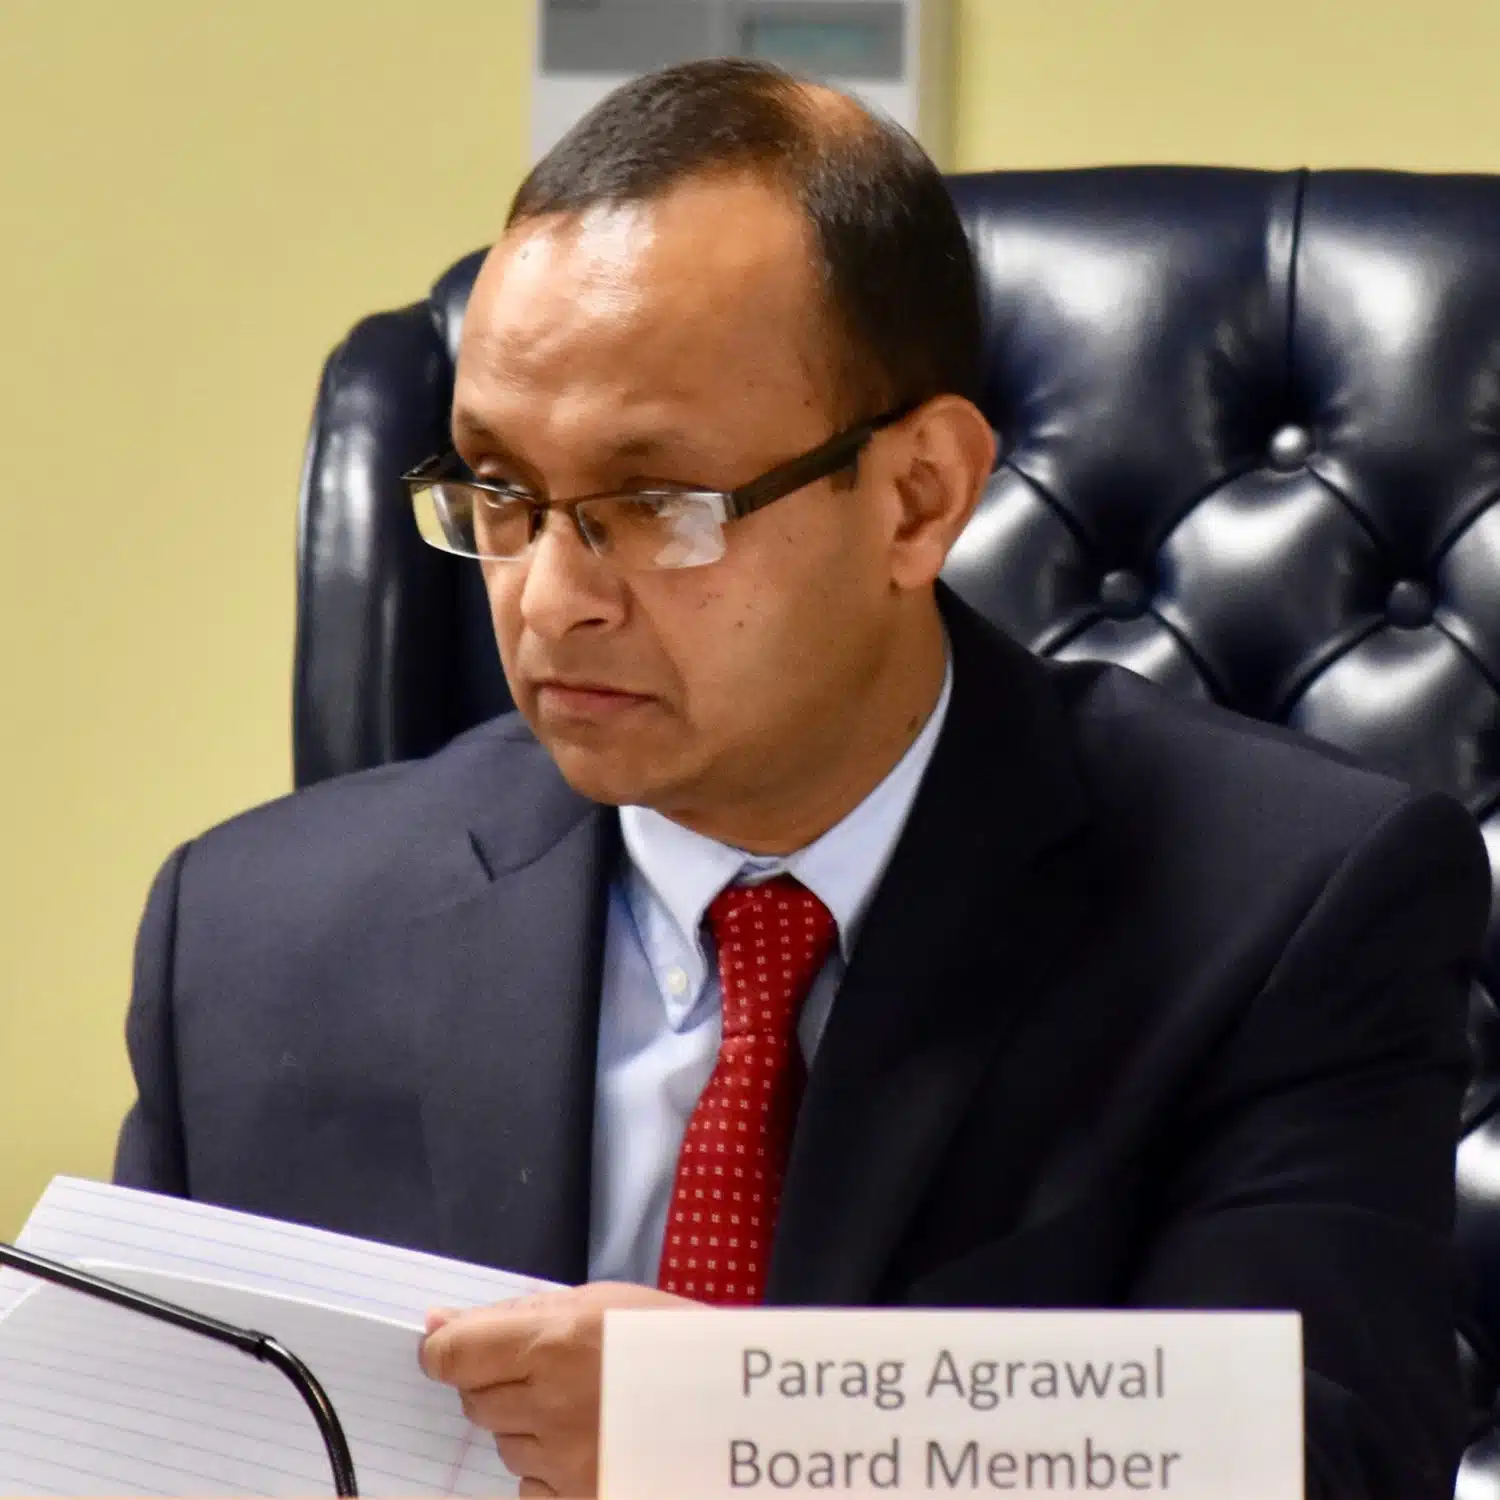 Parag Agrawal out at EFSB, leaving two members to decide on Invenergy power plant application